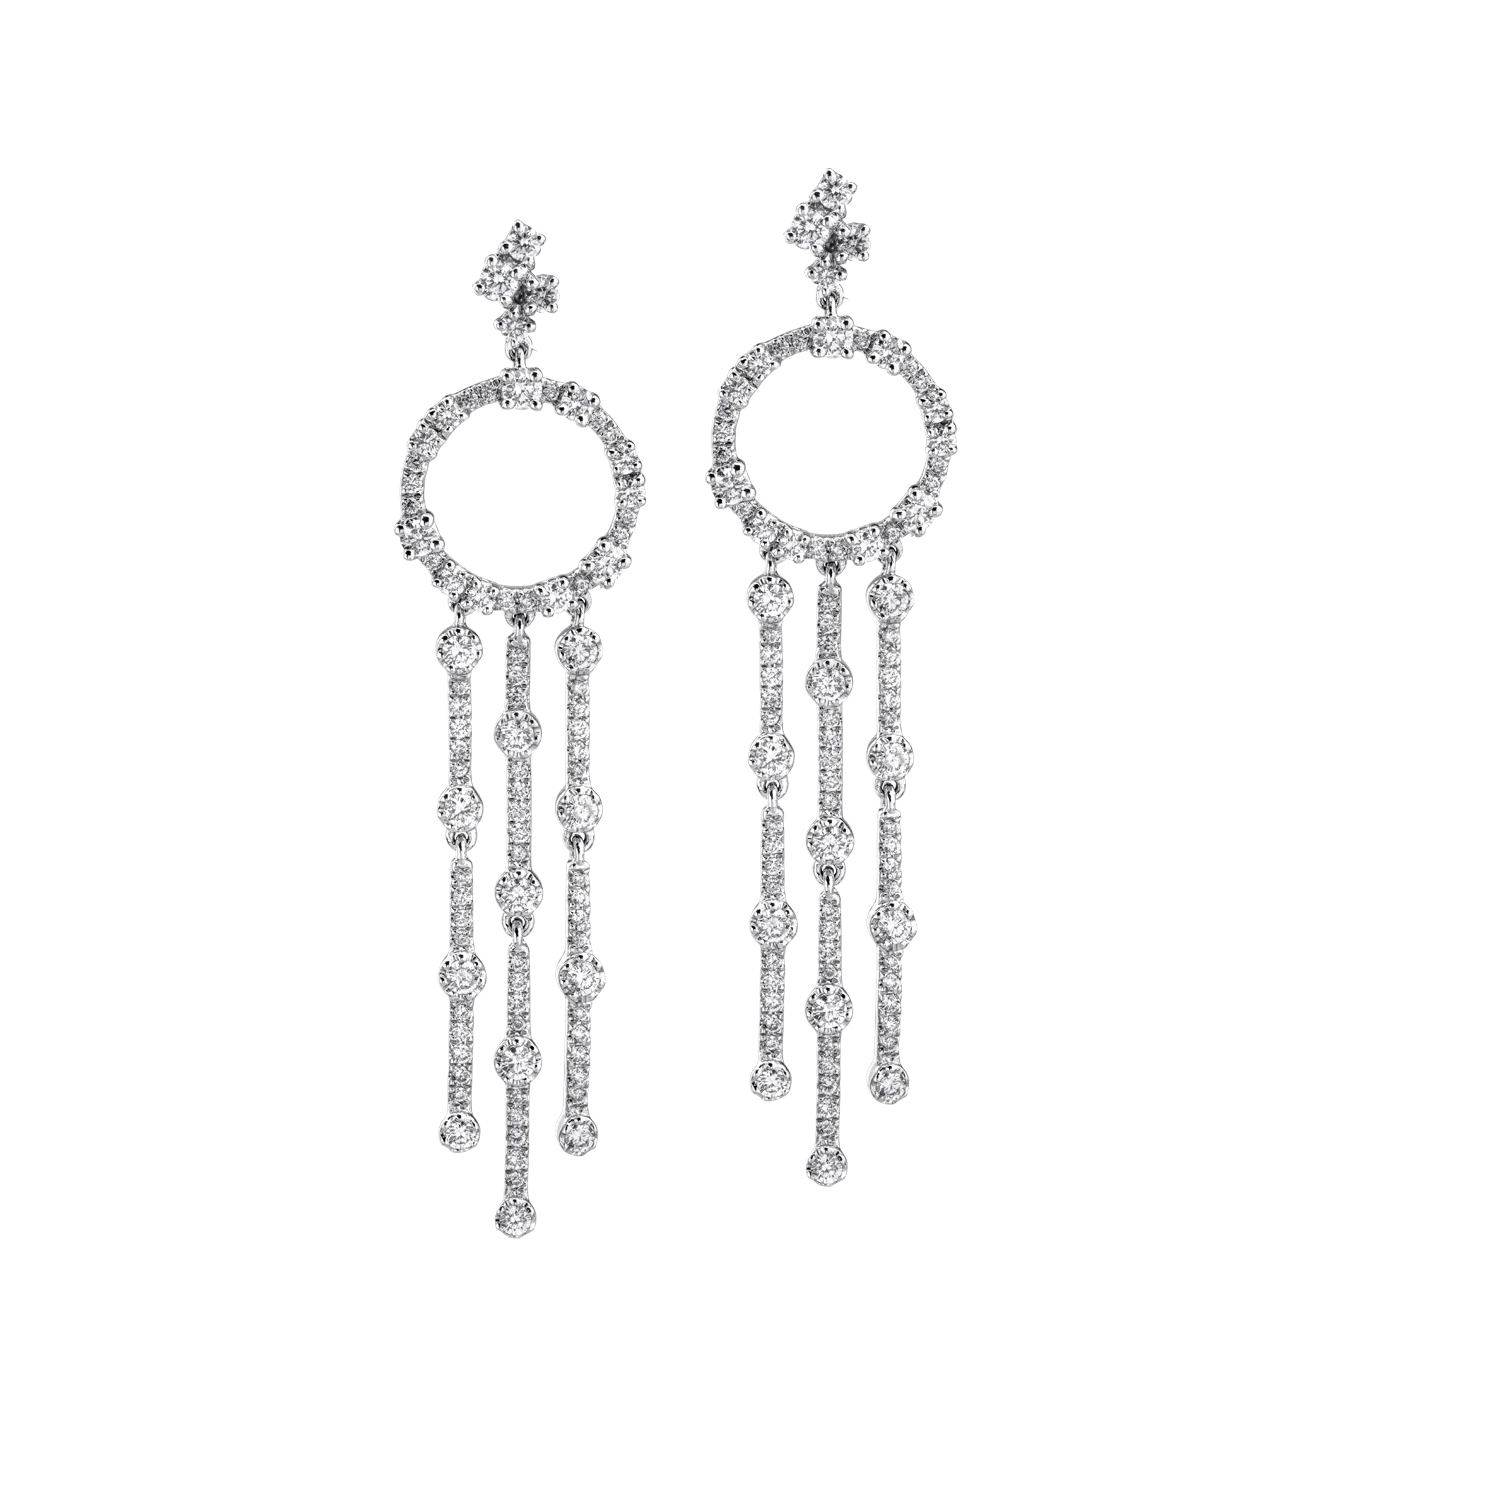 18K white gold earrings with 2.26ct diamonds